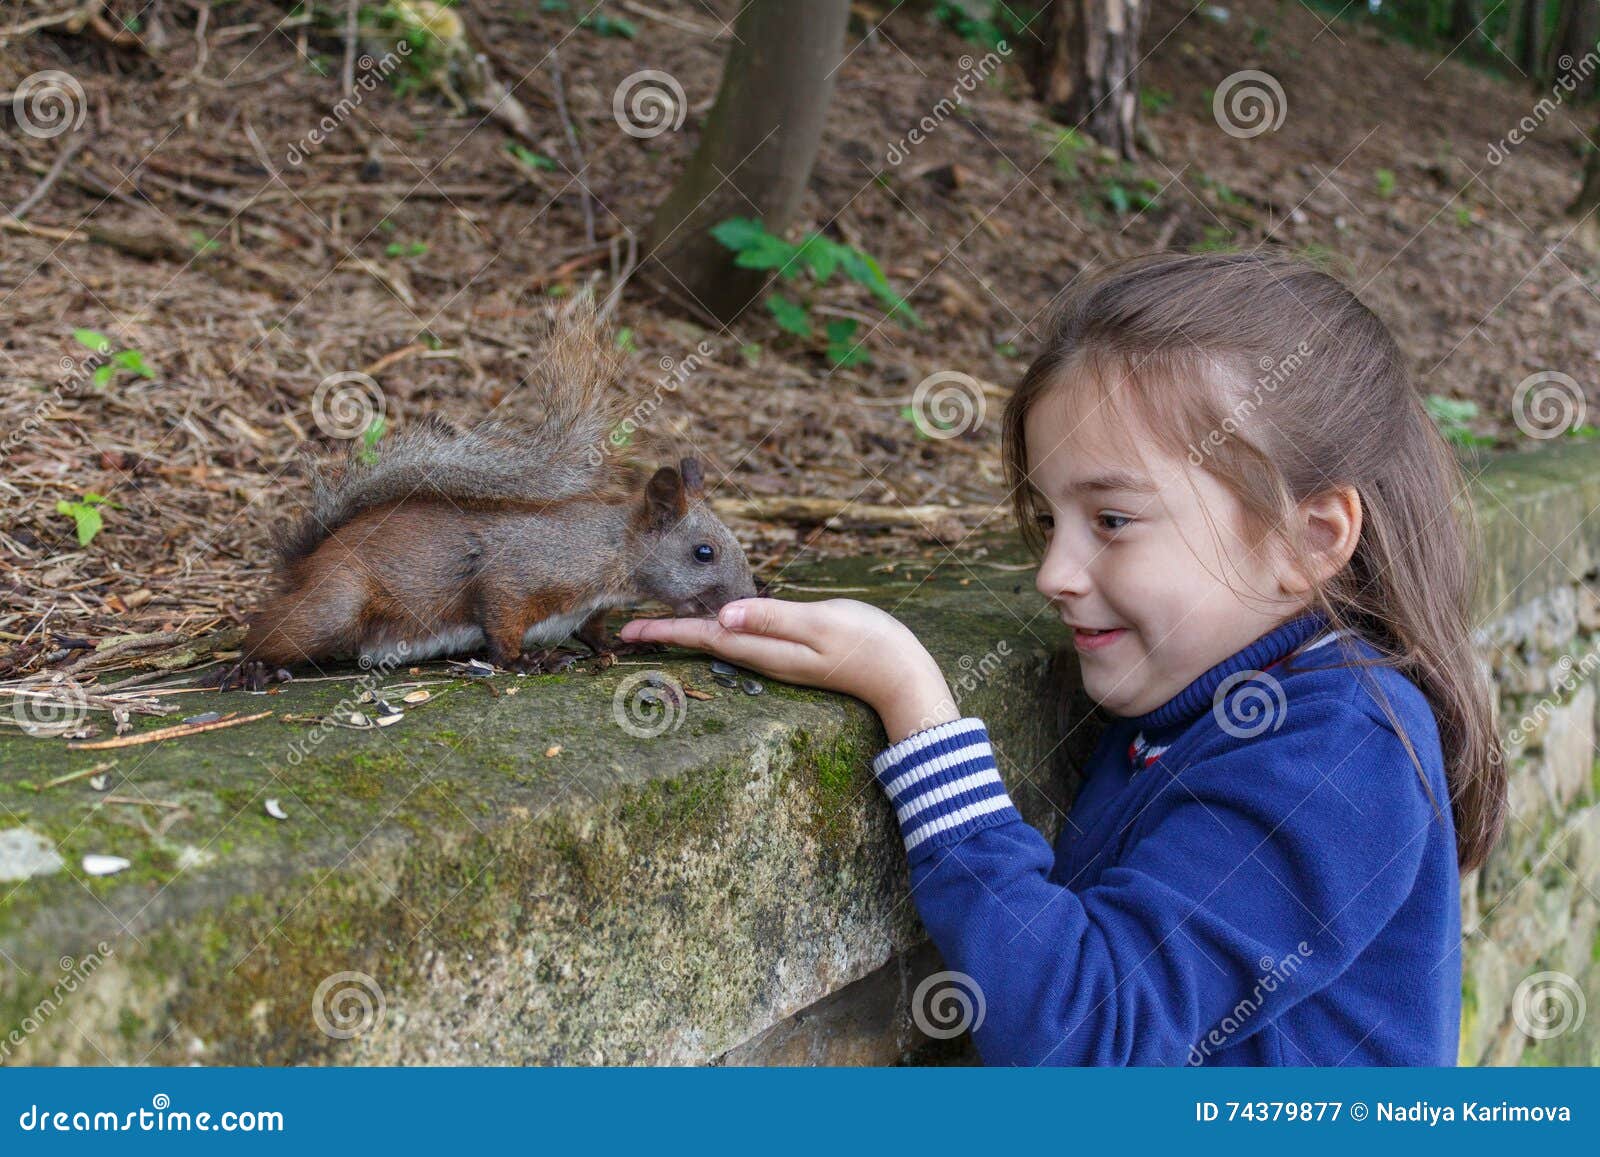 Girl Feeding Squirrel in Autumn Park. Stock Image - Image of girl, feed ...